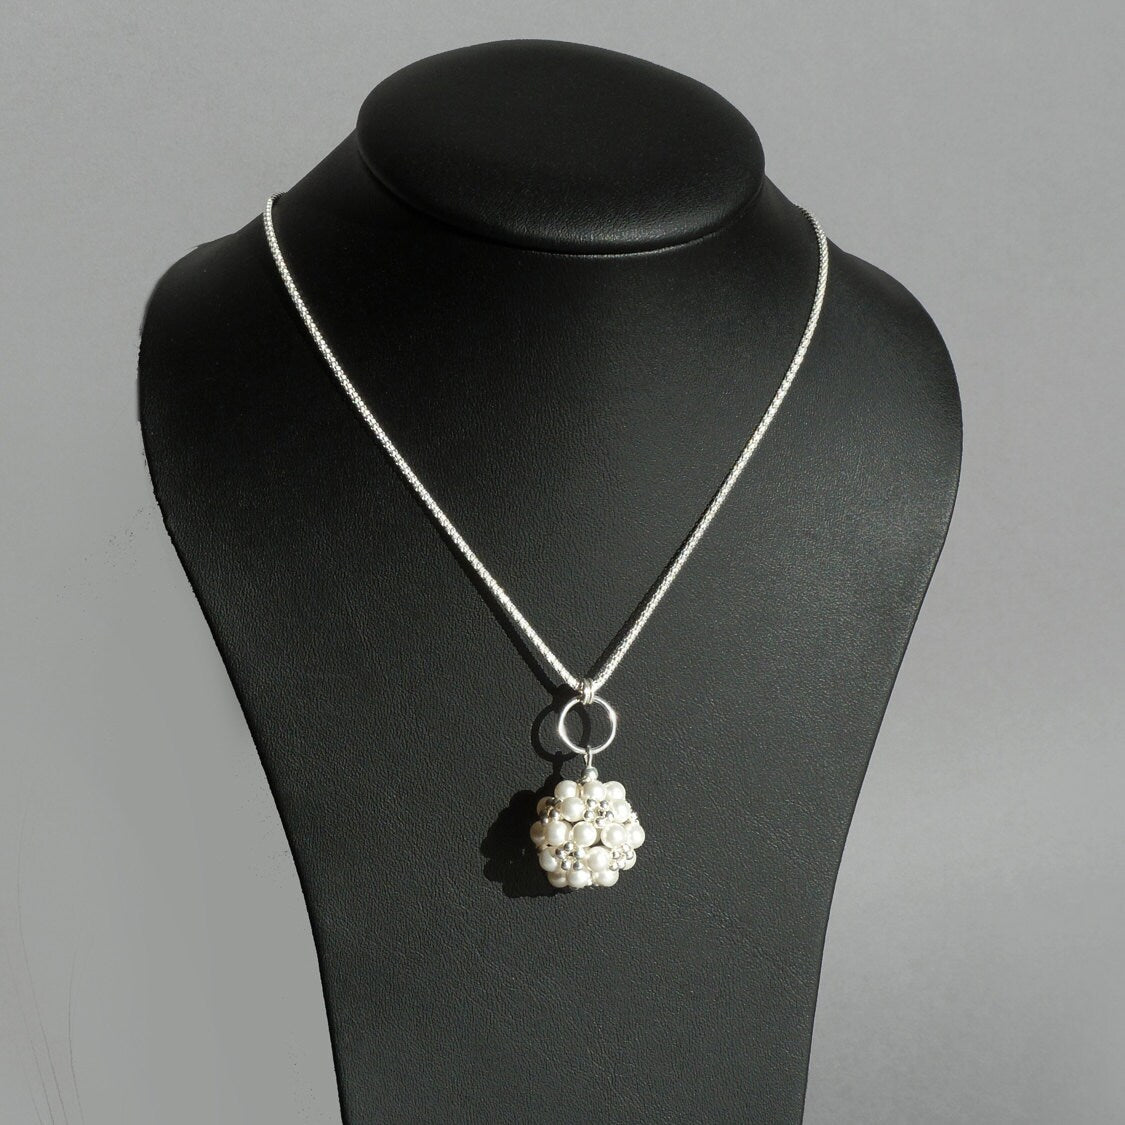 White Pearl Ball Necklace - White Glass Pearl and Sterling Silver Pendant